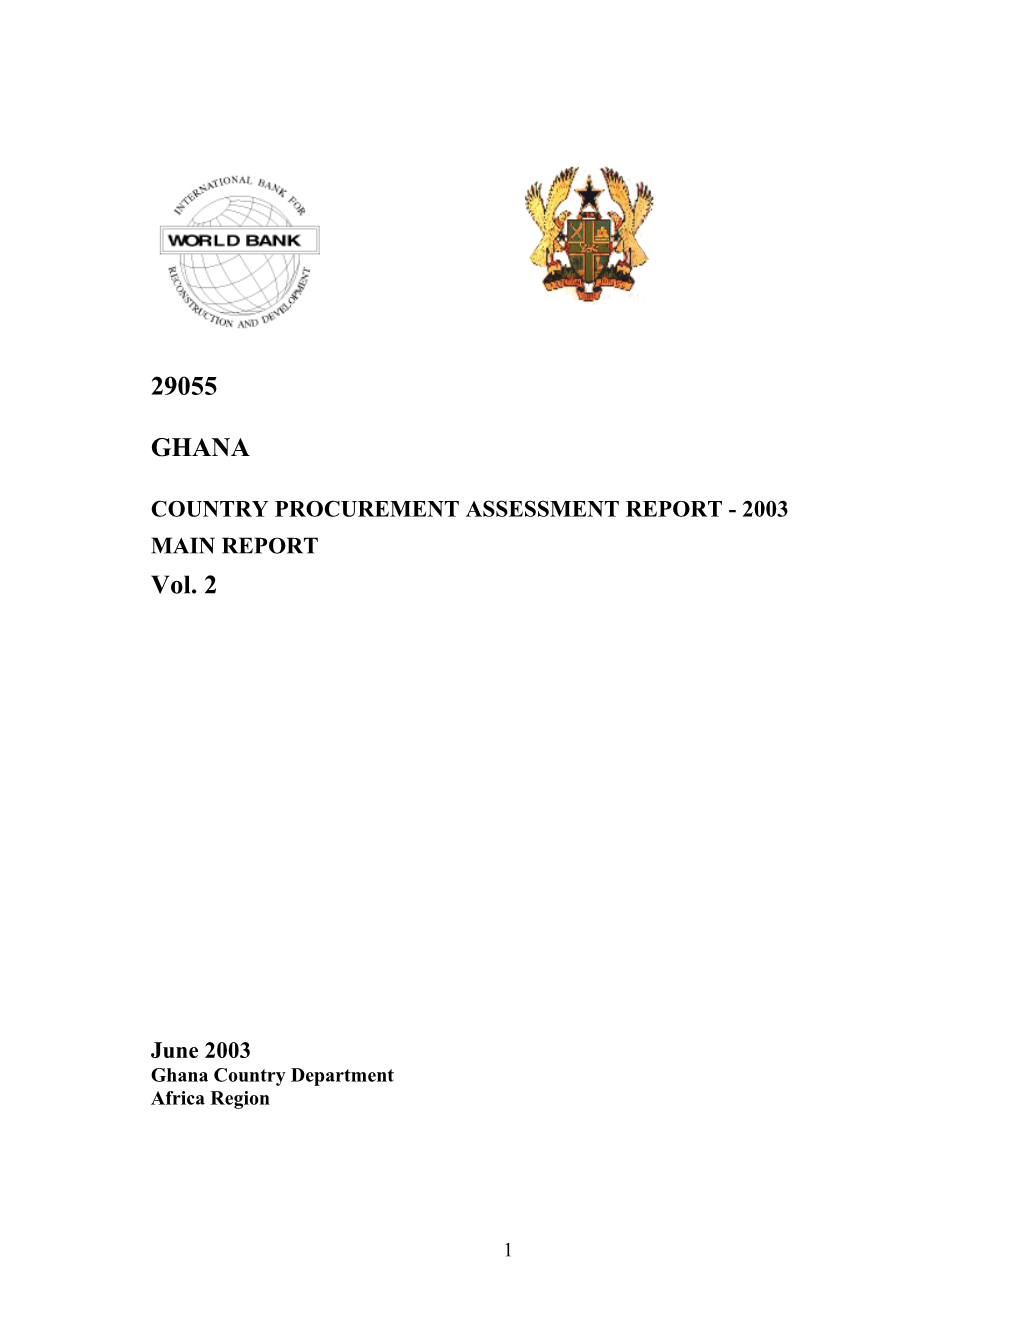 Country Procurement Assessment Report - 2003